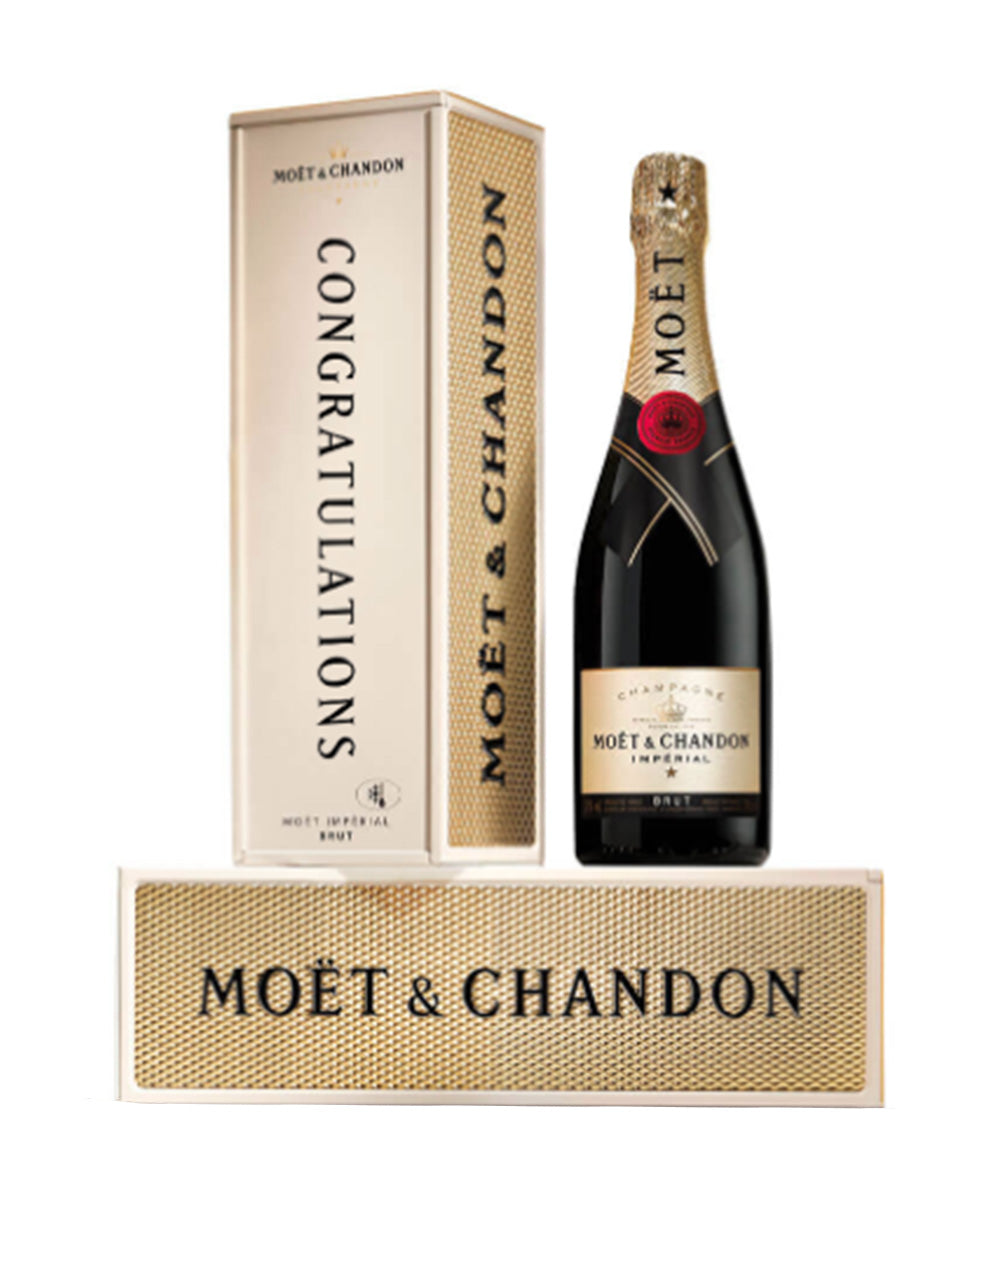 Moët & Chandon Is the Most Valuable Wine and Champagne Brand in